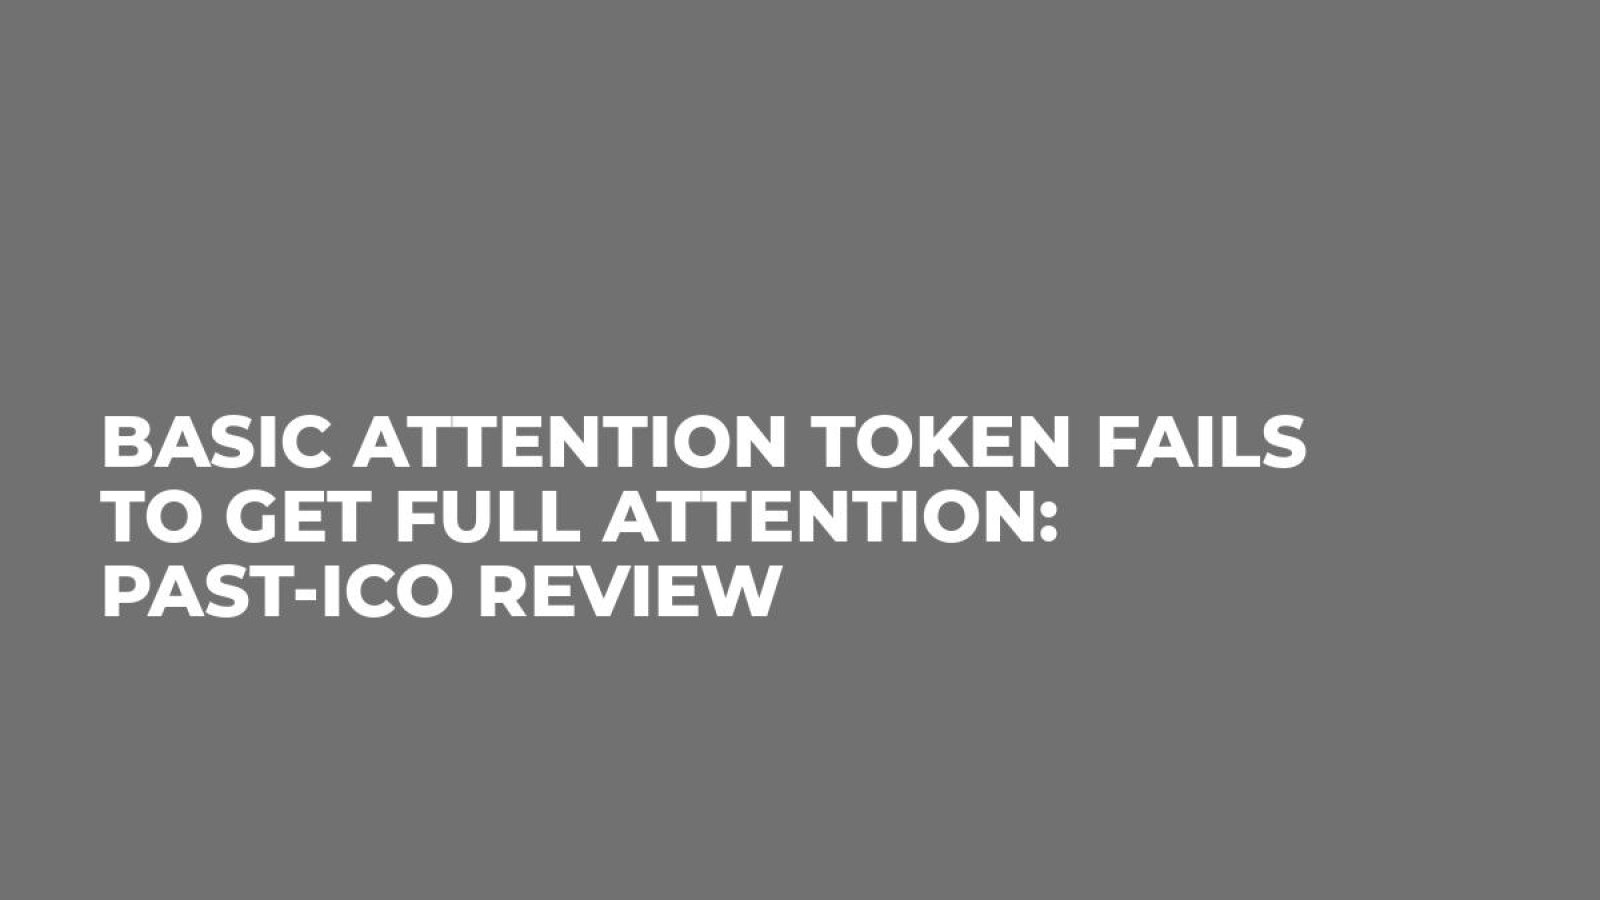 Basic Attention Token Fails to Get Full Attention: Past-ICO Review